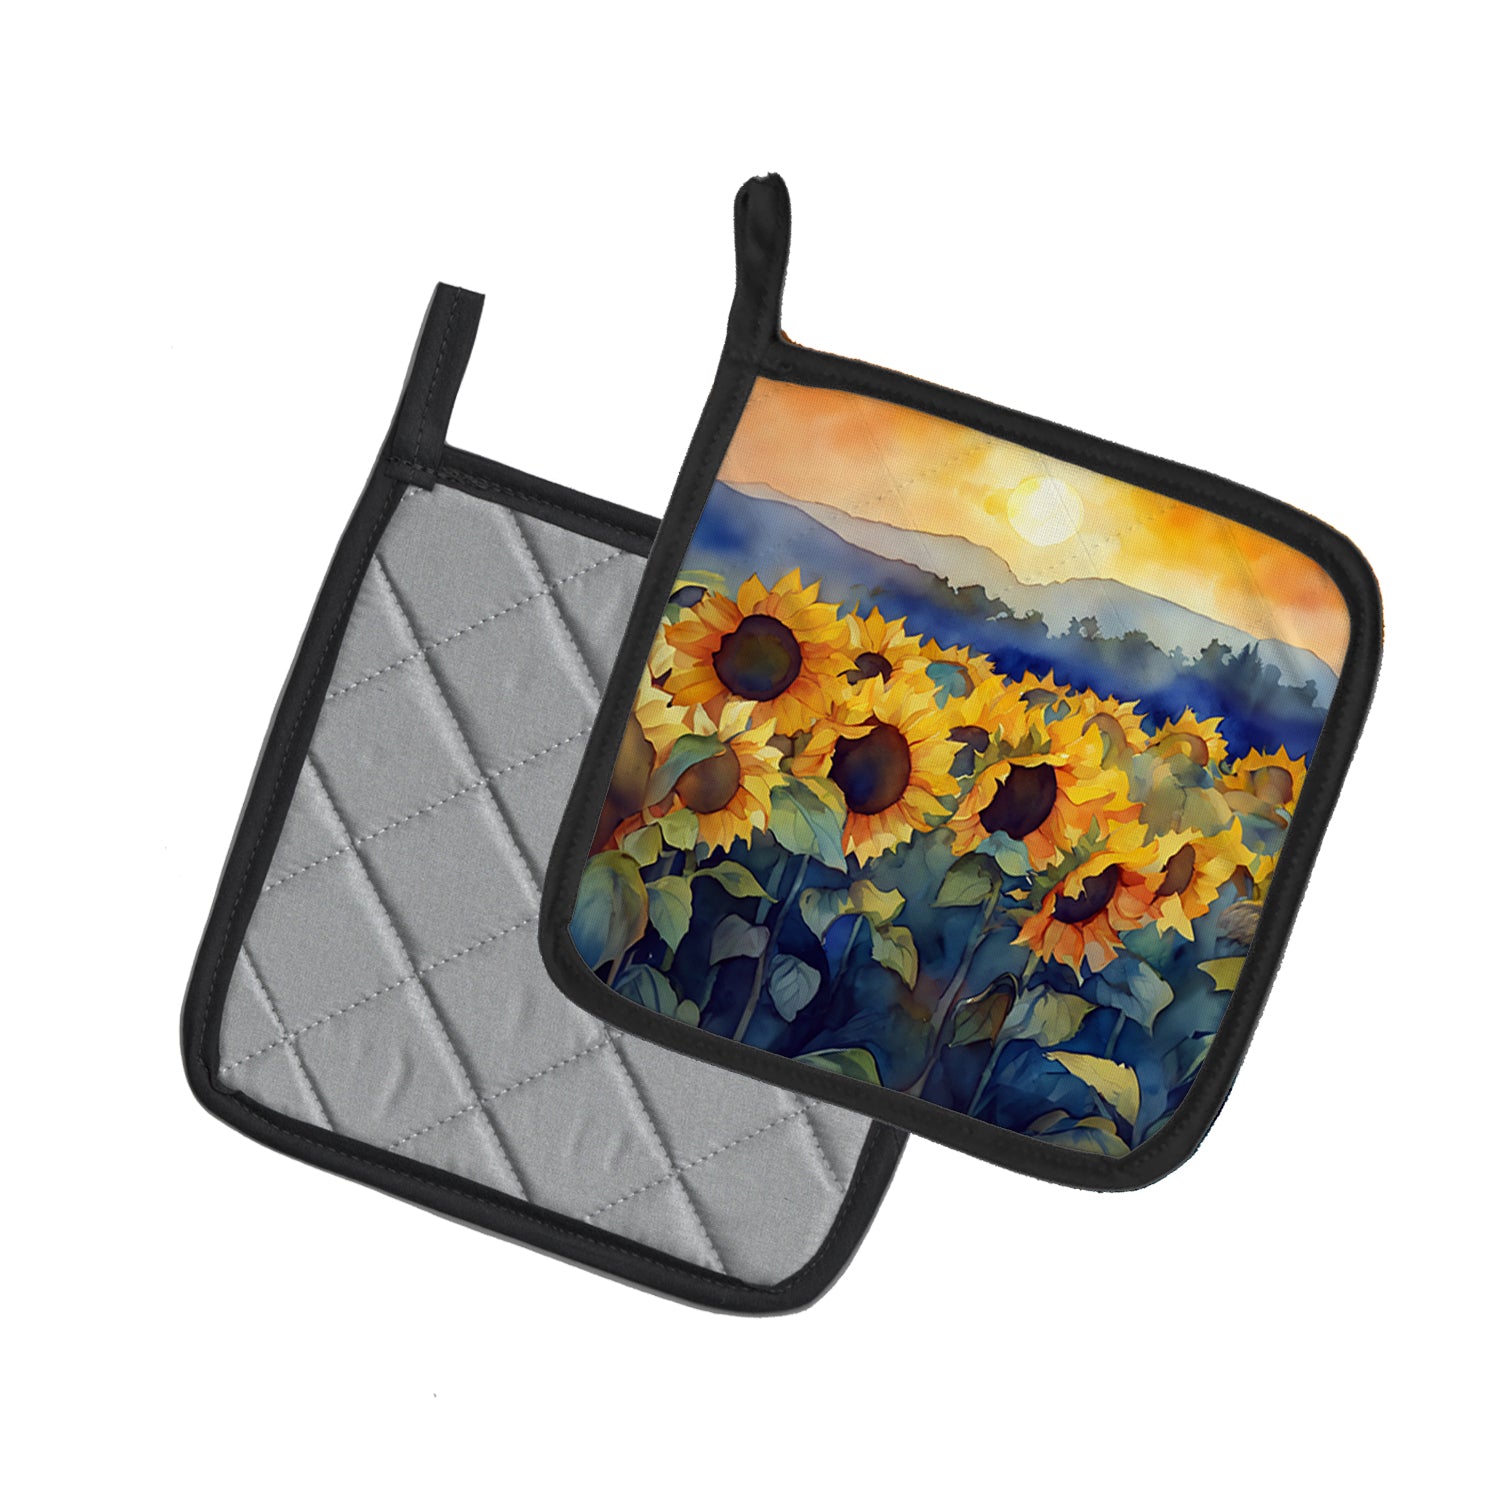 Buy this Sunflowers in Watercolor Pair of Pot Holders